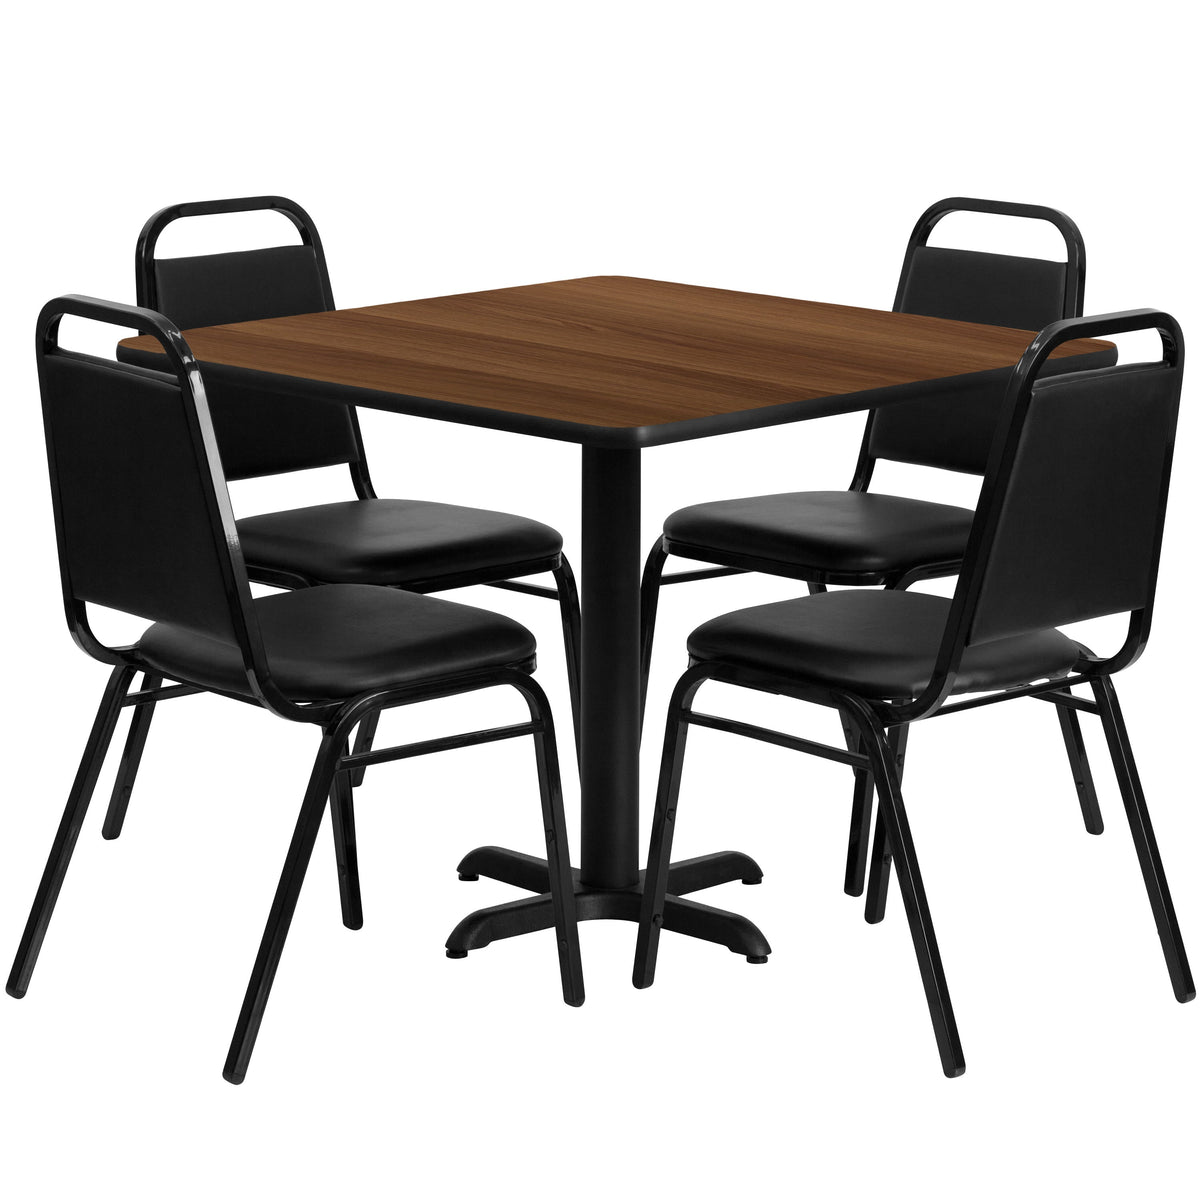 Walnut Top/Black Vinyl Seat |#| 36inch Square Walnut Laminate Table with X-Base and 4 Black Banquet Chairs